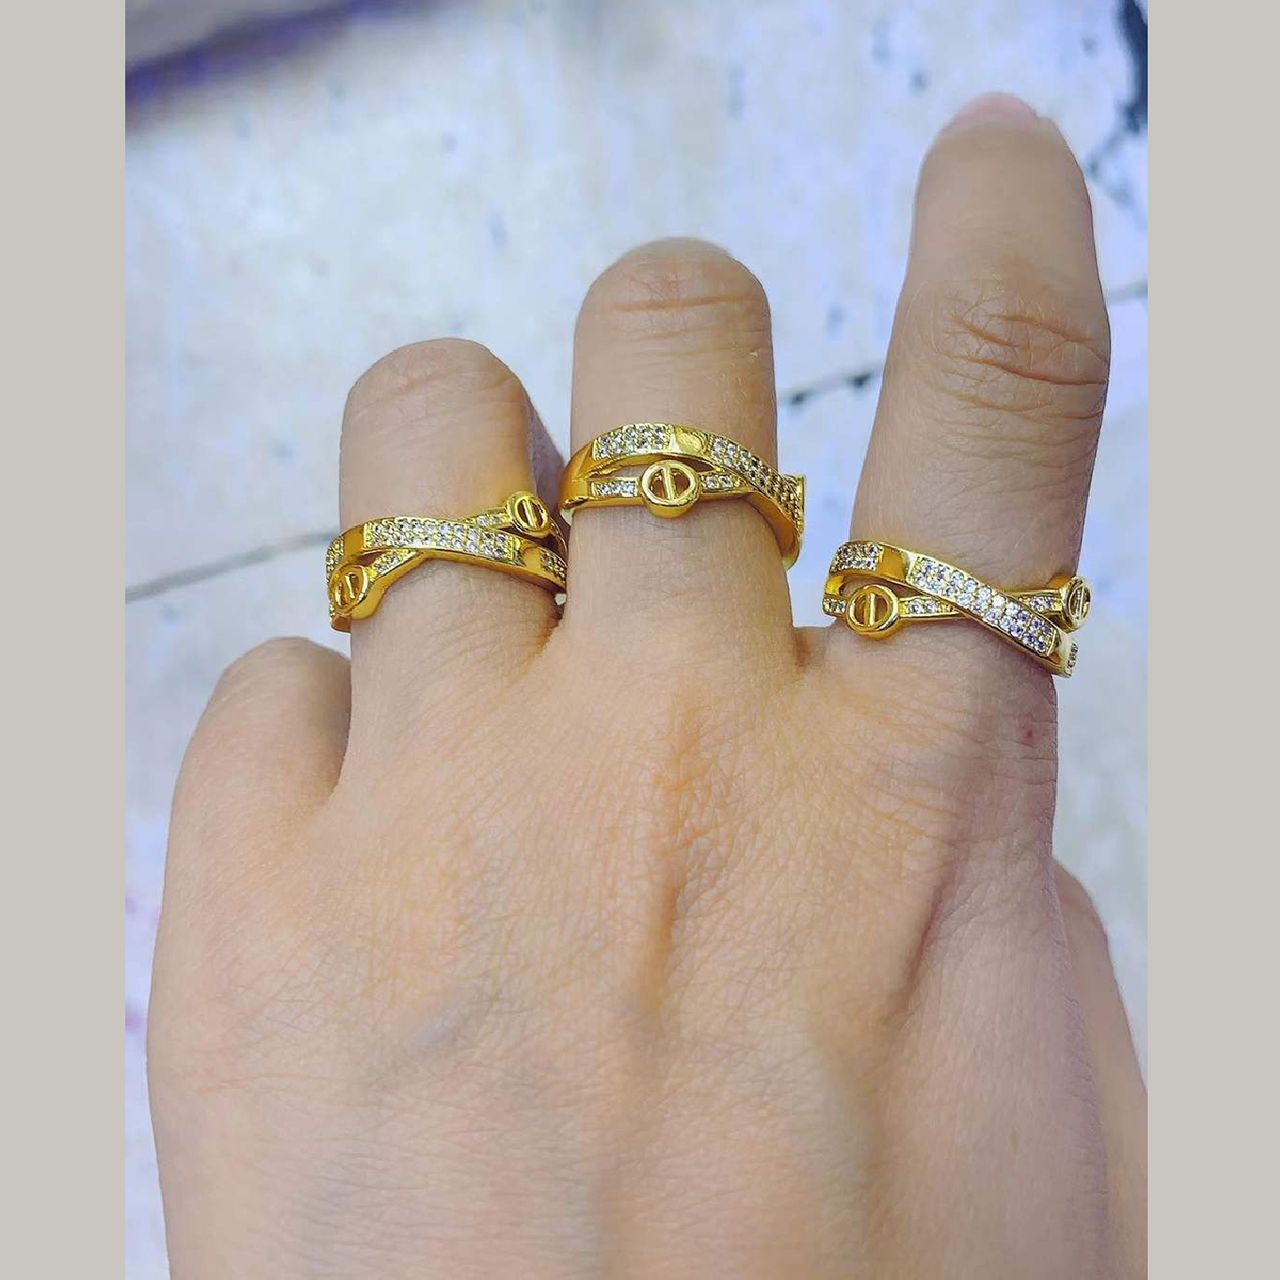 Gold Rings for Women, Stacking Ring, Gold Ring Set, Minimalist Ring, Dainty  Ring, Stackable Ring, Gold Chain Ring, Midi Ring, Gift for Her - Etsy